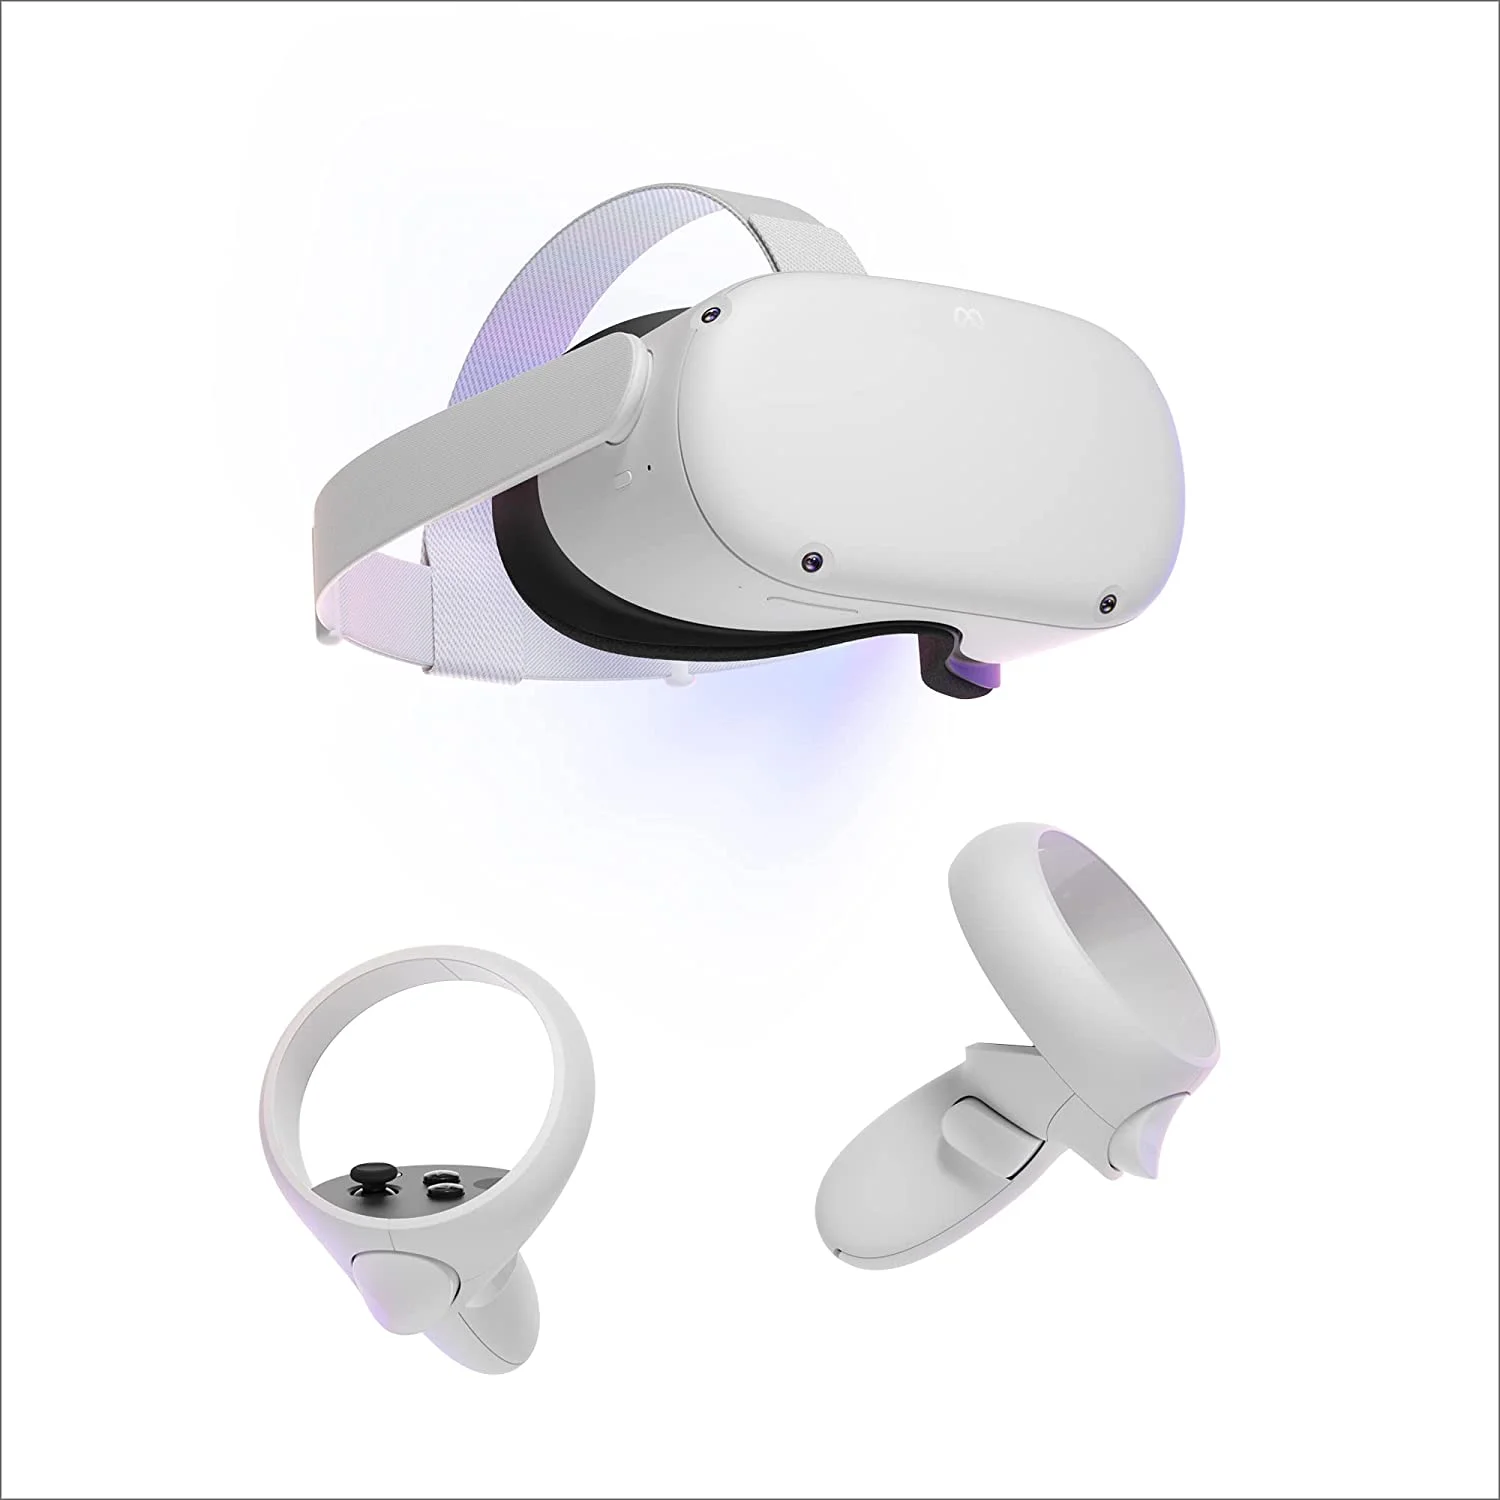 Meta Quest 2, Best VR Headsets for iPhone